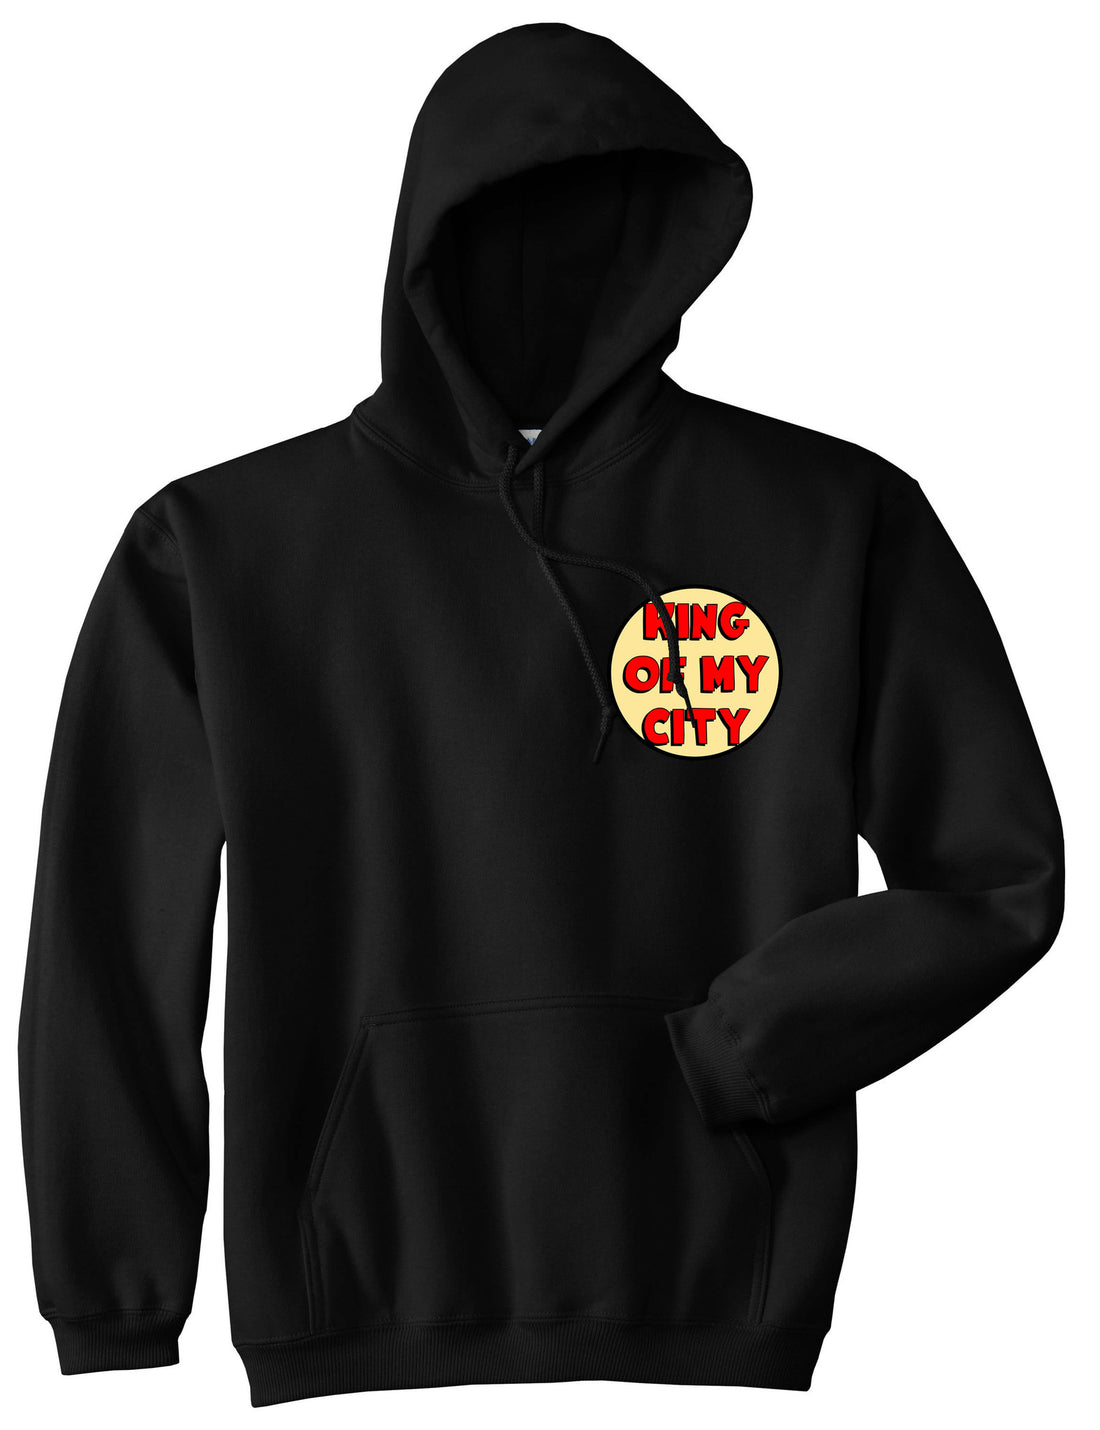 King Of My City Chest Logo Boys Kids Pullover Hoodie Hoody in Black by Kings Of NY